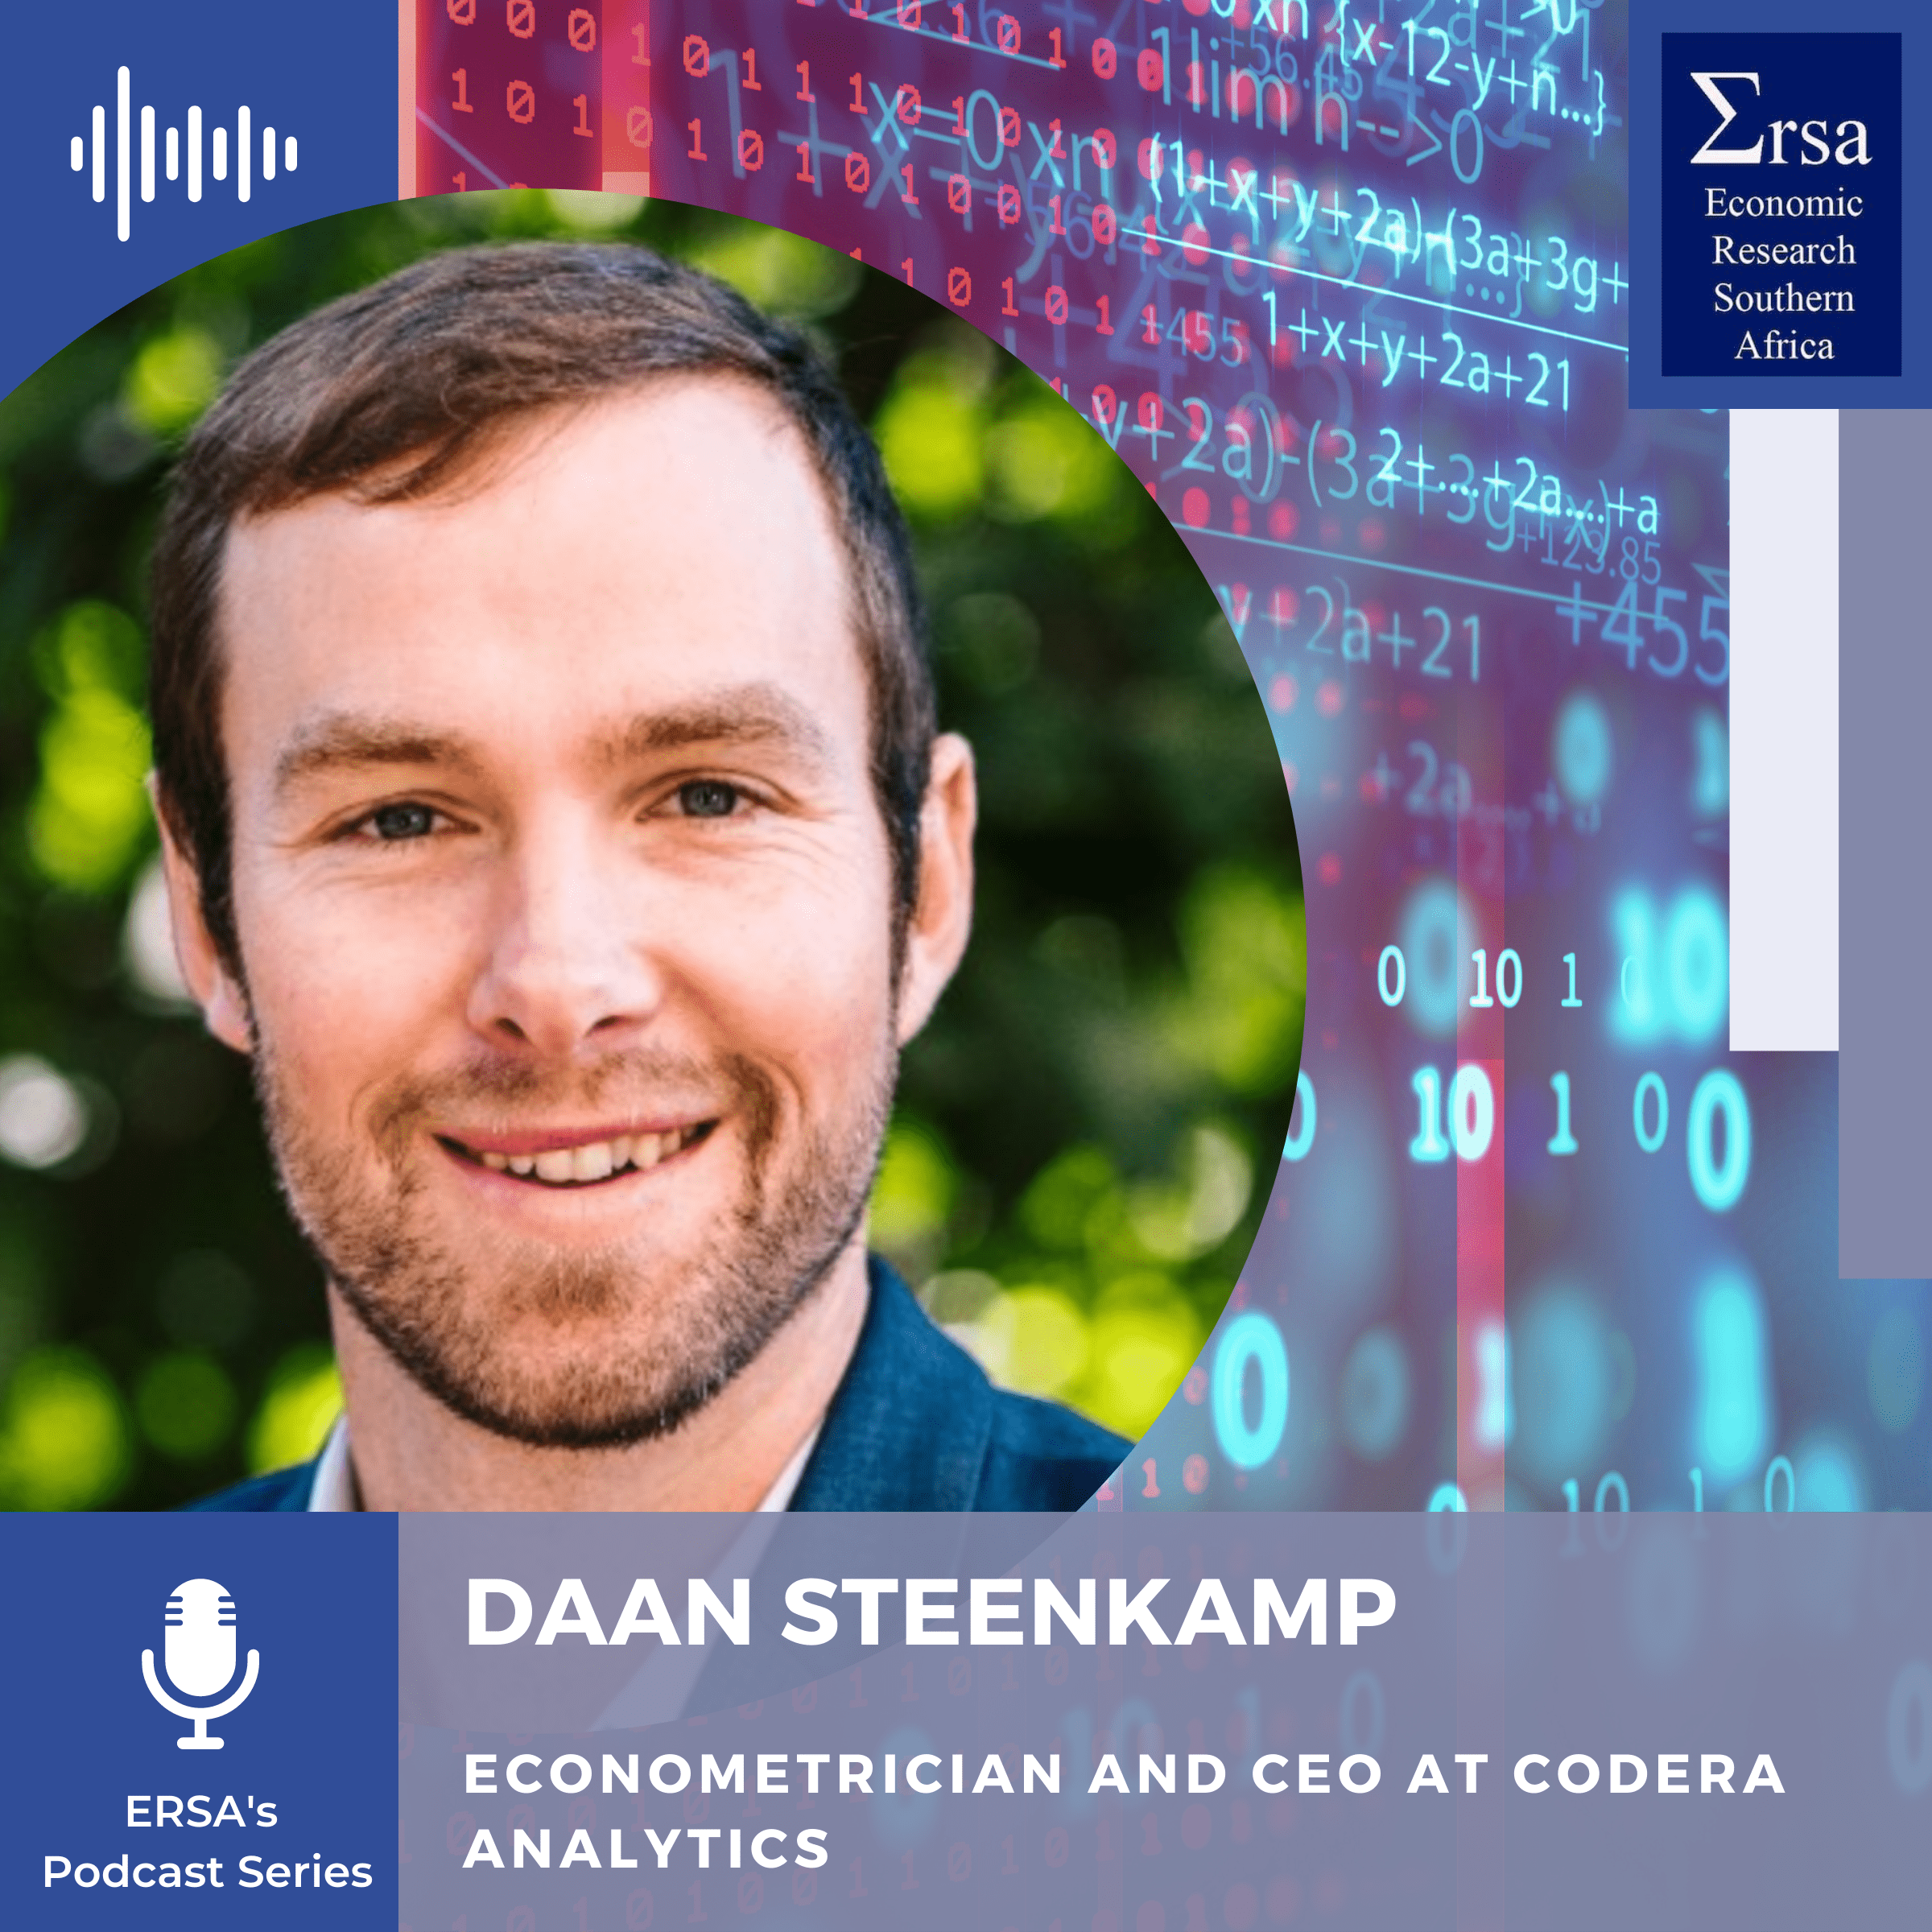 Dr Daan Steenkamp on nowcasting: how economists benefit from machine learning and big data